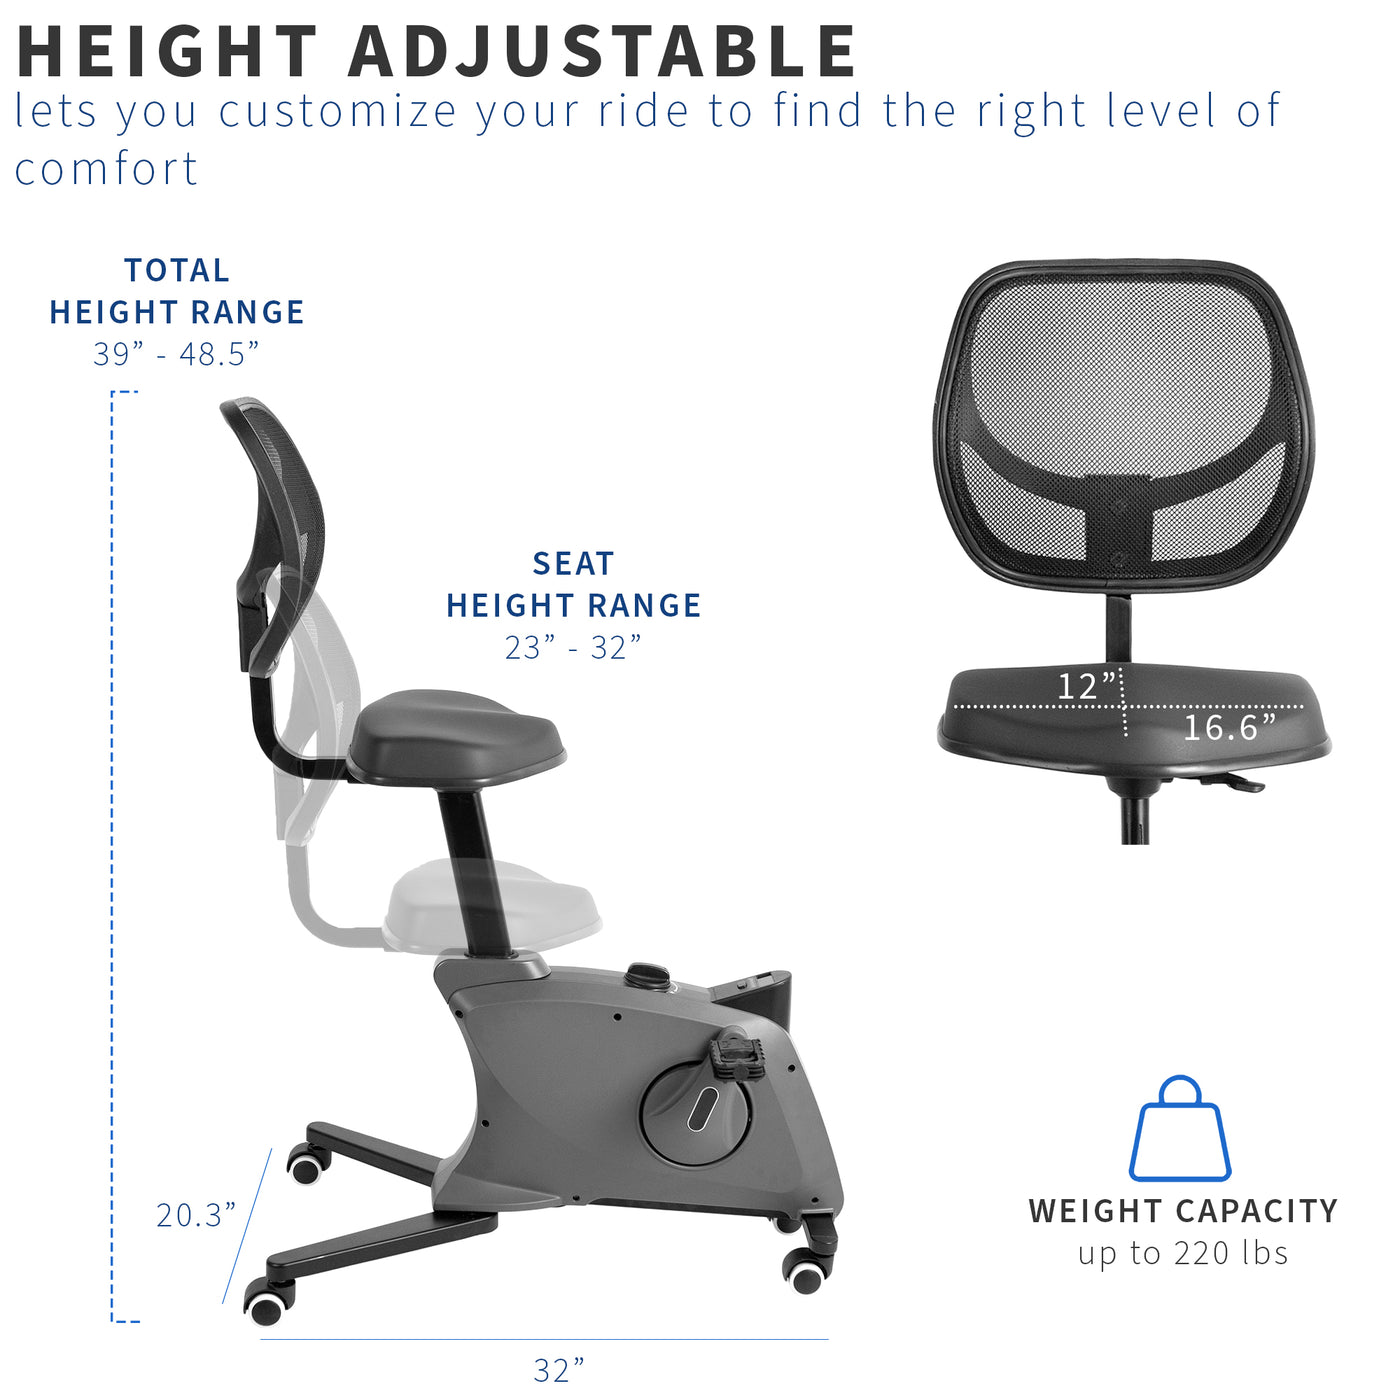 Sturdy portable height adjustable deskside exercise bike with wide height range and seat height range.